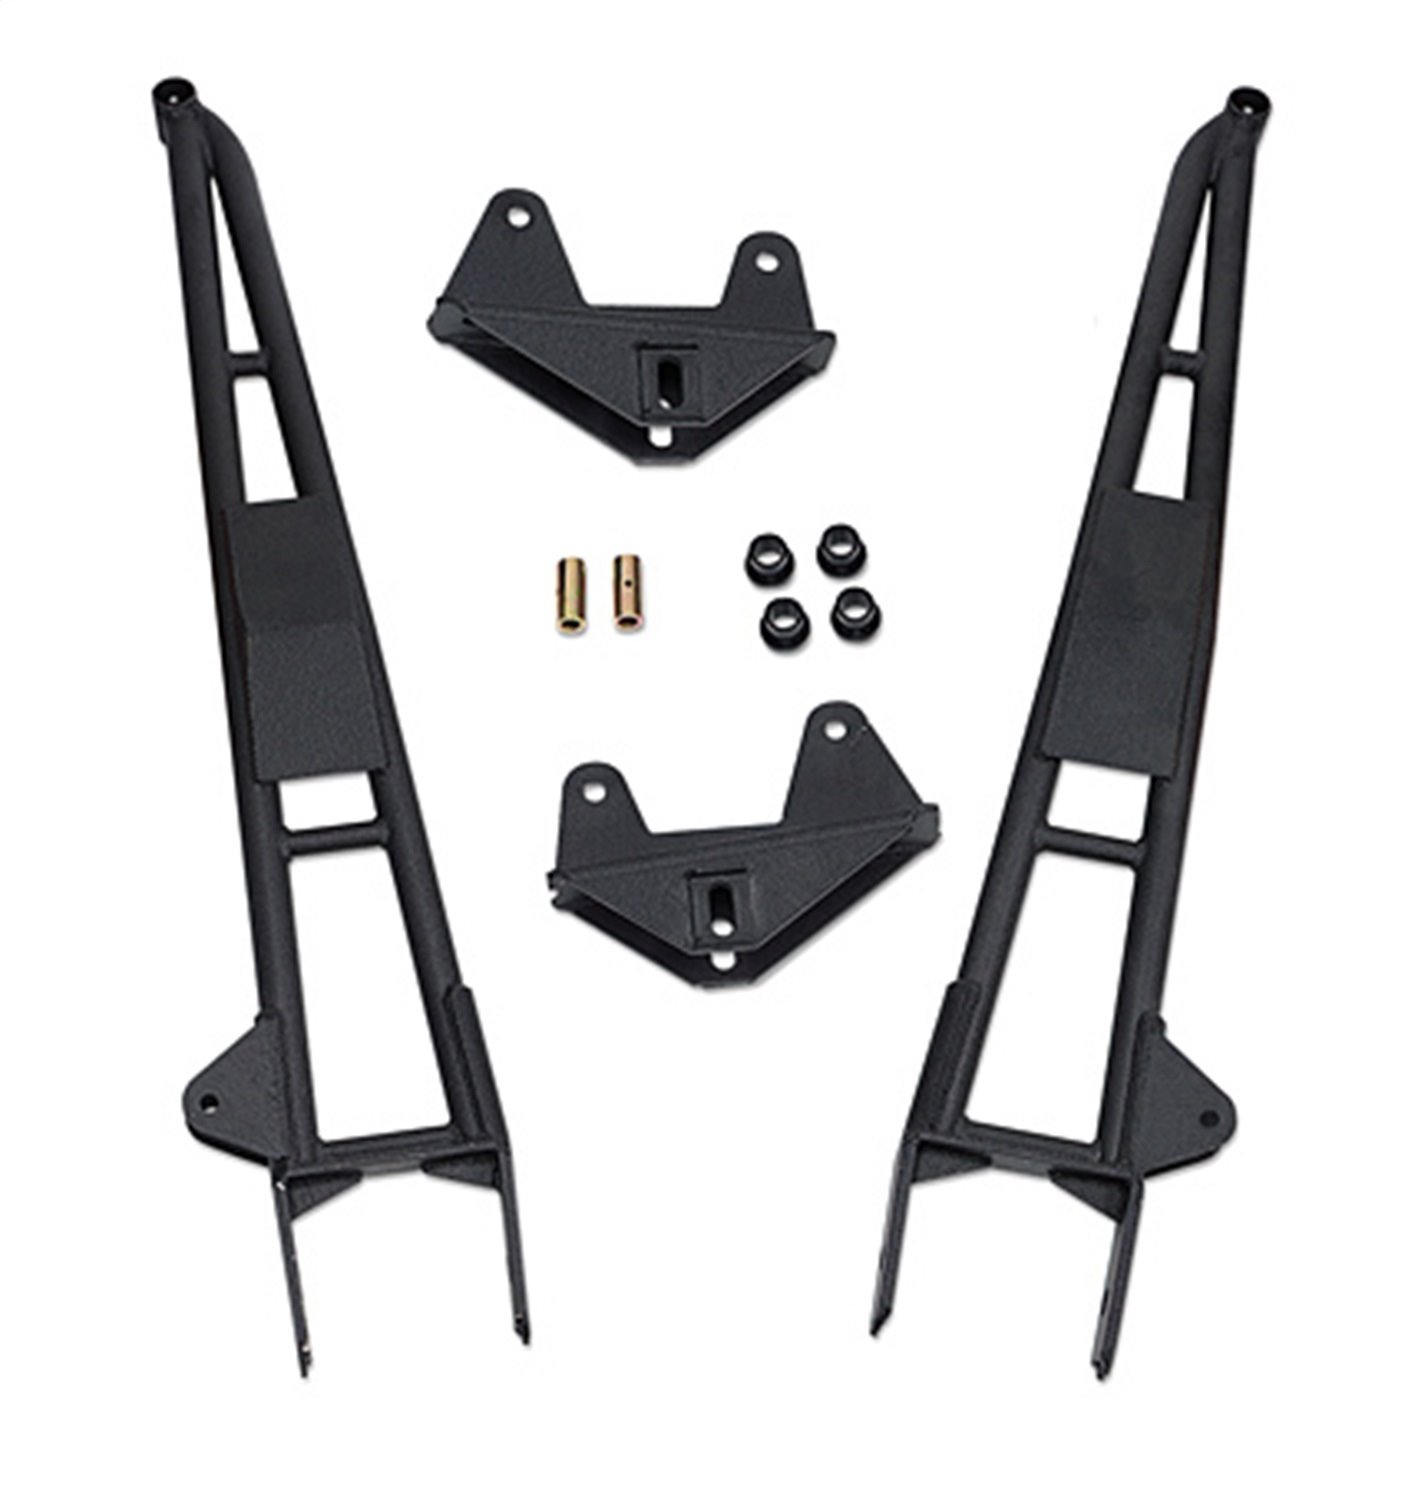 Radius Arm Kit 2.5 in. And 4 in. Incl. Mounting Brackets